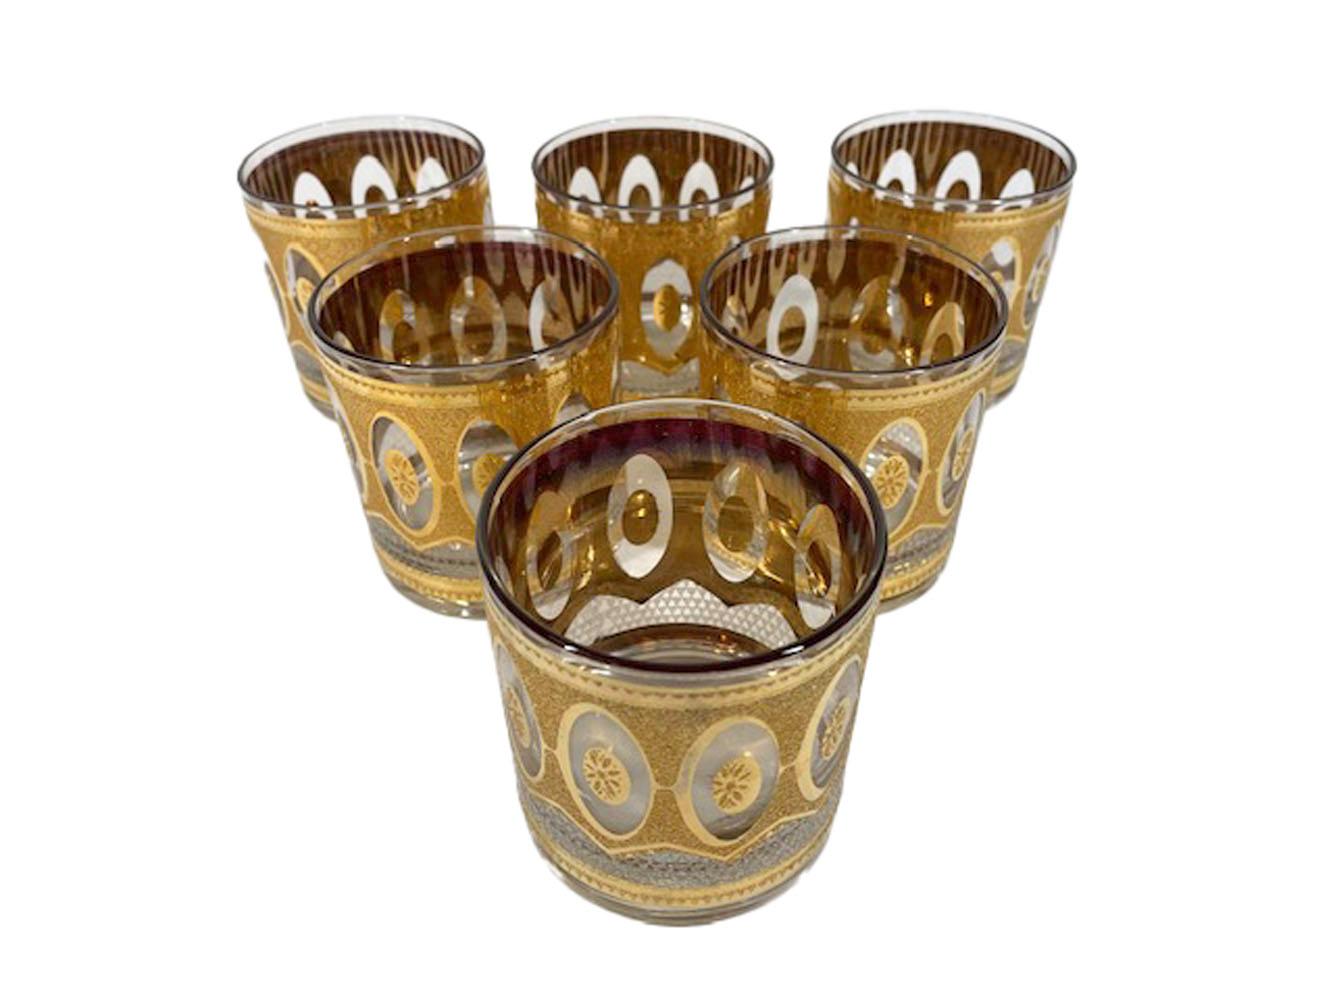 Set of 6 mid-century modern rocks glasses in the Regency pattern by Culver, LTD. decorated in 22k gold with textured and smooth finishes framing a series of oval reserves.